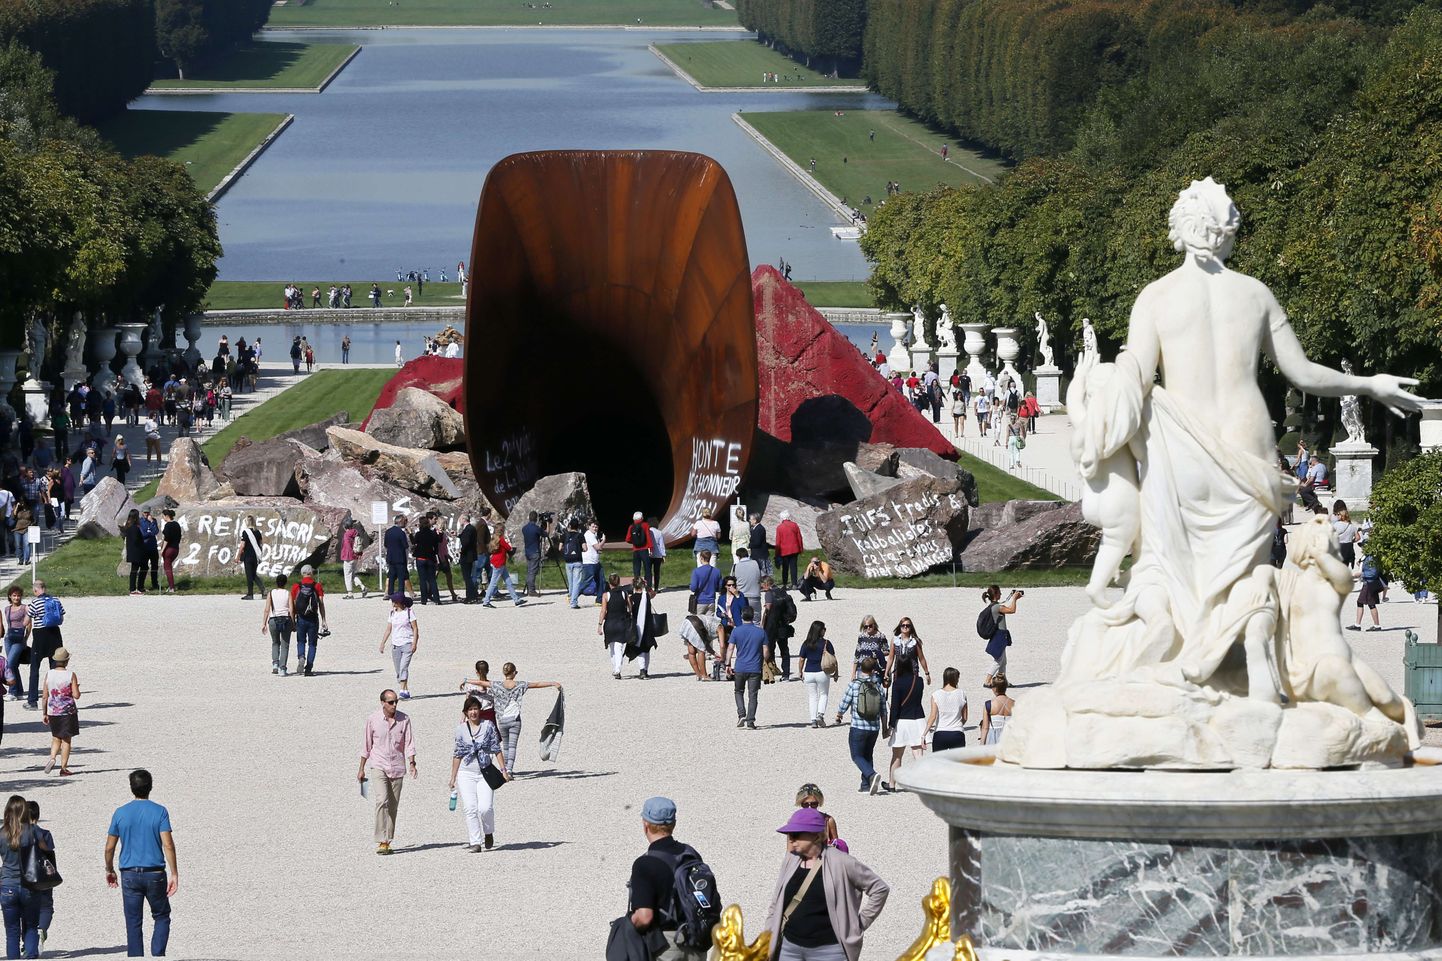 Visitors walk past the earth and mixed media monumental artwork "Dirty Corner" a 2011 Cor-Ten steel, by British contemporary artist of Indian origin Anish Kapoor on September 11, 2015 in Versailles at the Chateau of Versailles.  On September 6 anti-Semitic inscriptions and phrases such as "Queen sacrificed, twice insulted," "the second rape of the nation by deviant Jewish activism" and "Christ is king in Versailles" were sprayed in white paint on the sculpture. On September 1, the sculpture was vandalized for a third time, with graffiti saying "Respect Art as U trust God" scrawled on it, prompting he wanted the graffiti to remain to bear witness to hatred, thus opening a debate which could fall fowl of French laws repressing anti-Semitism. AFP PHOTO / PATRICK KOVARIK